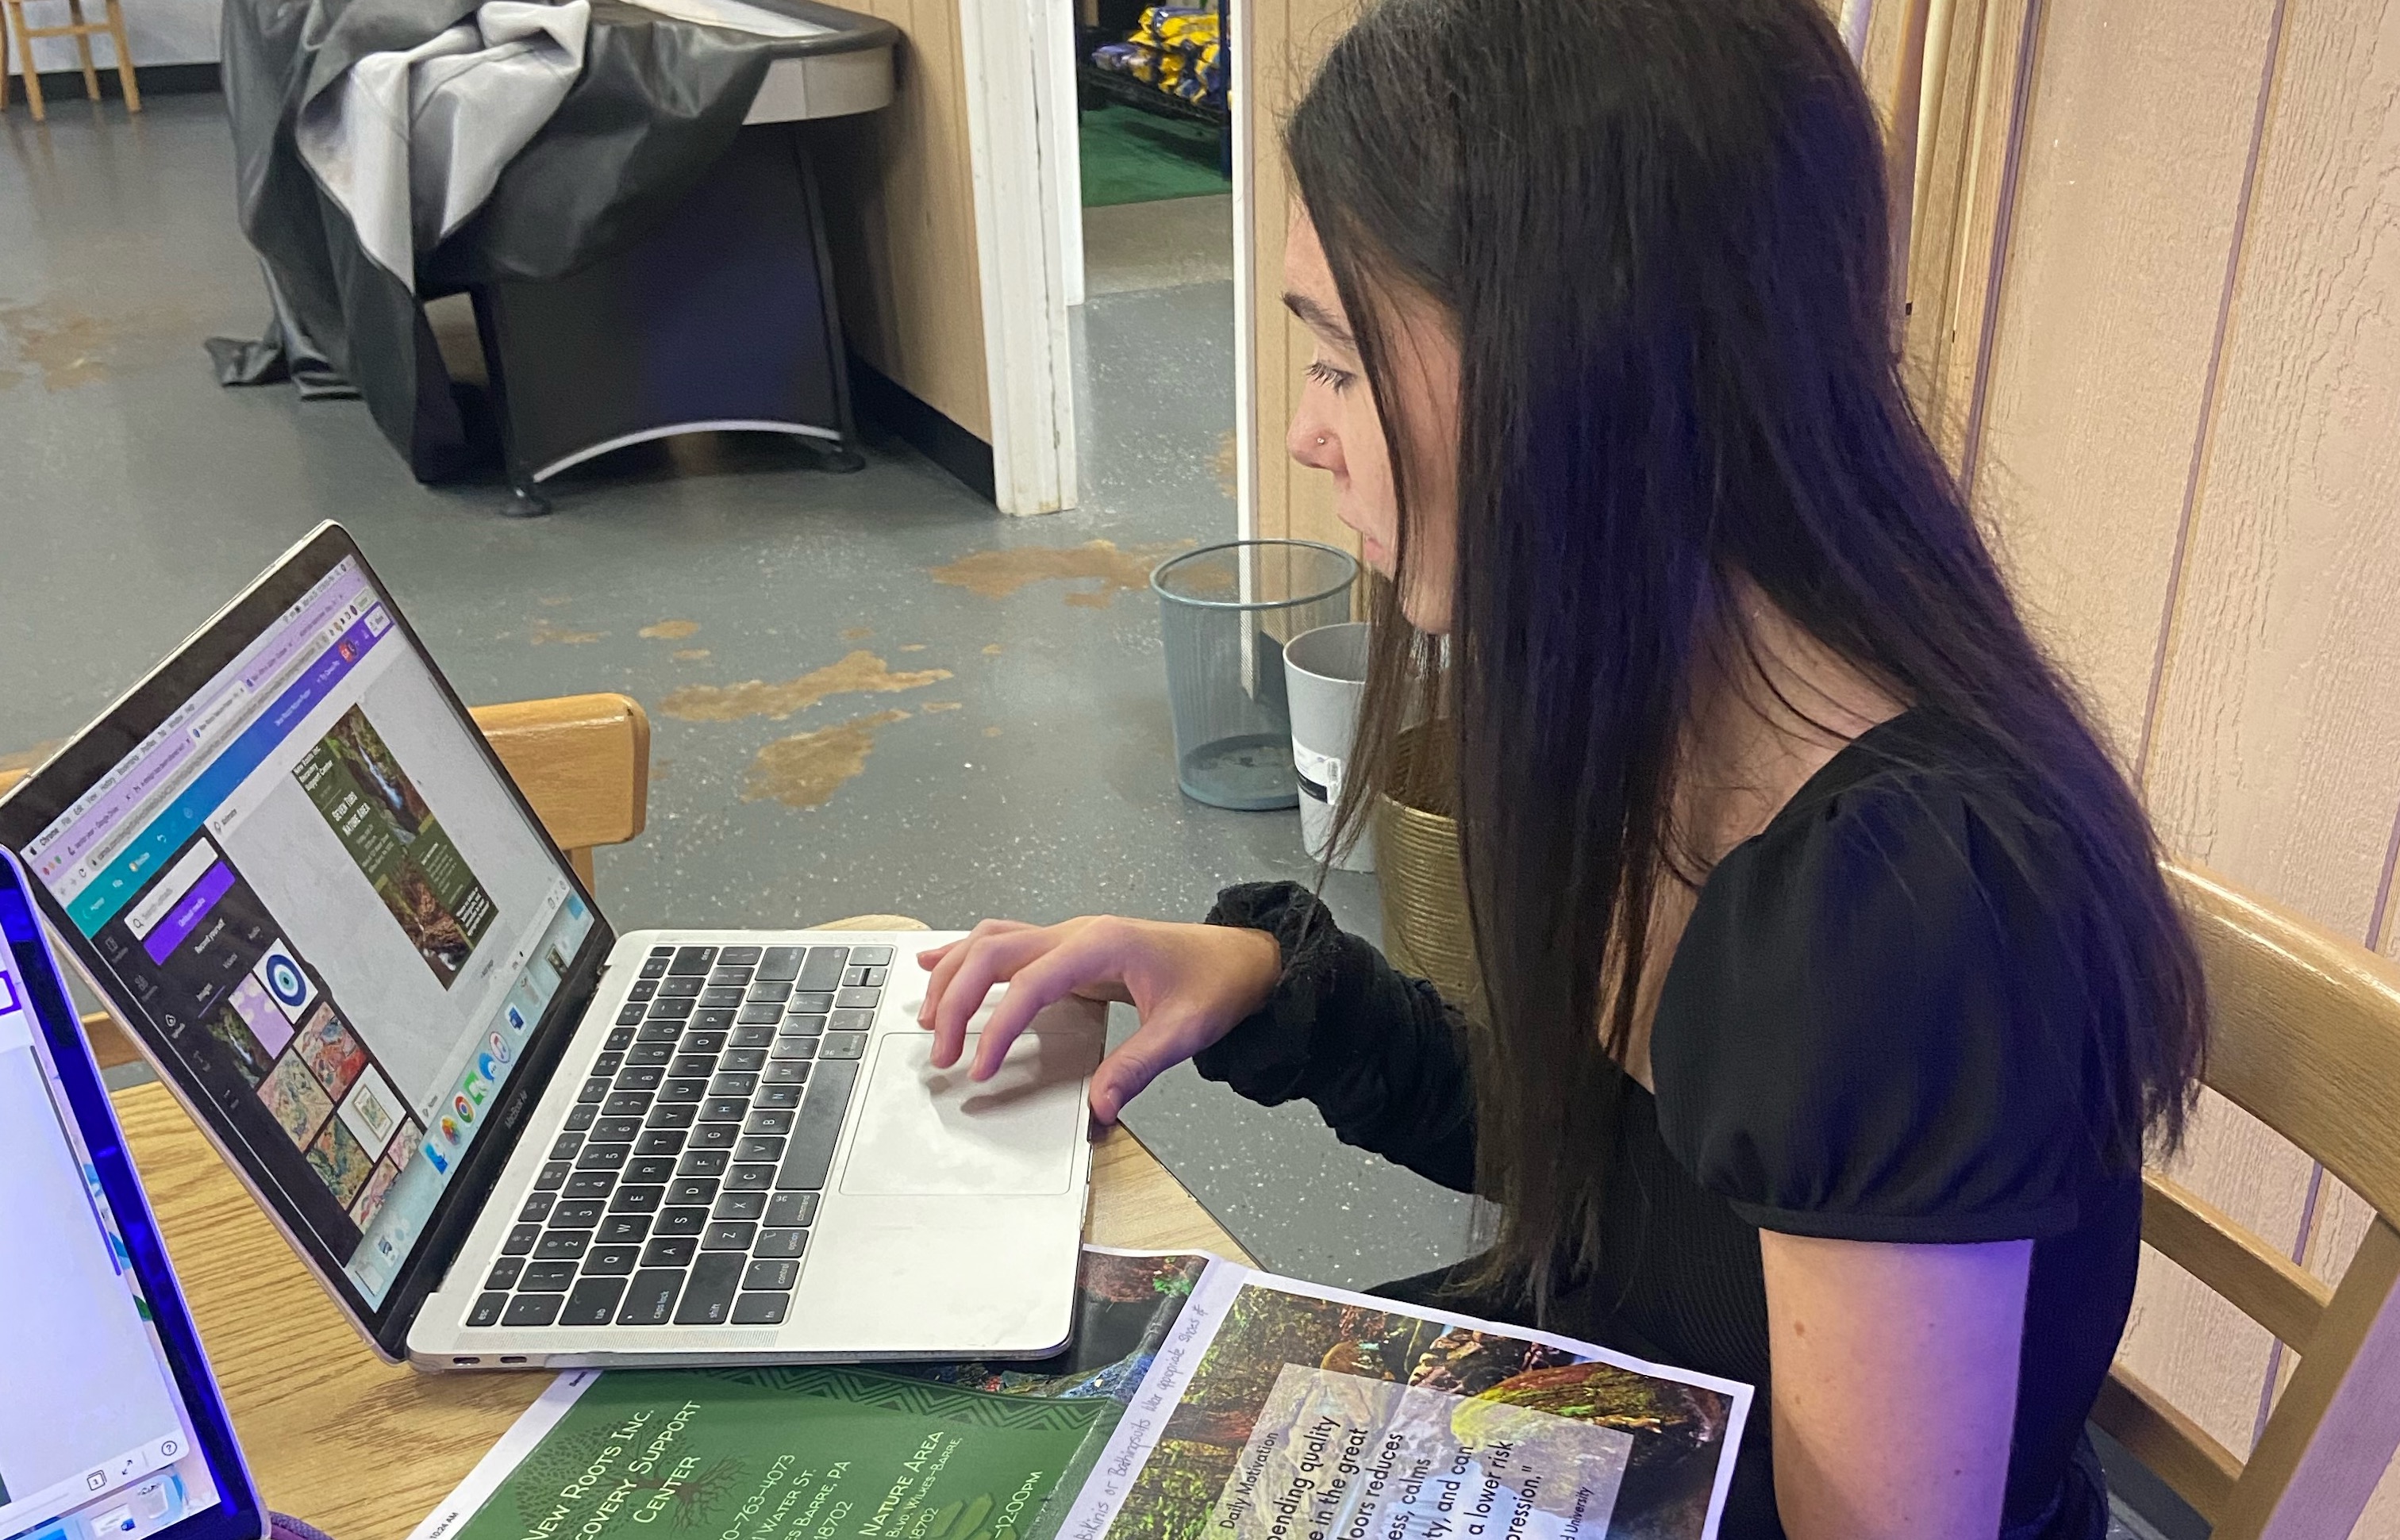 Occupational therapy major Erin Quinn '23, shown, inputs information about clients into a computer program as part of a 40-hour summer fieldwork assignment at New Roots Recovery Center in Wilkes Barre, PA.